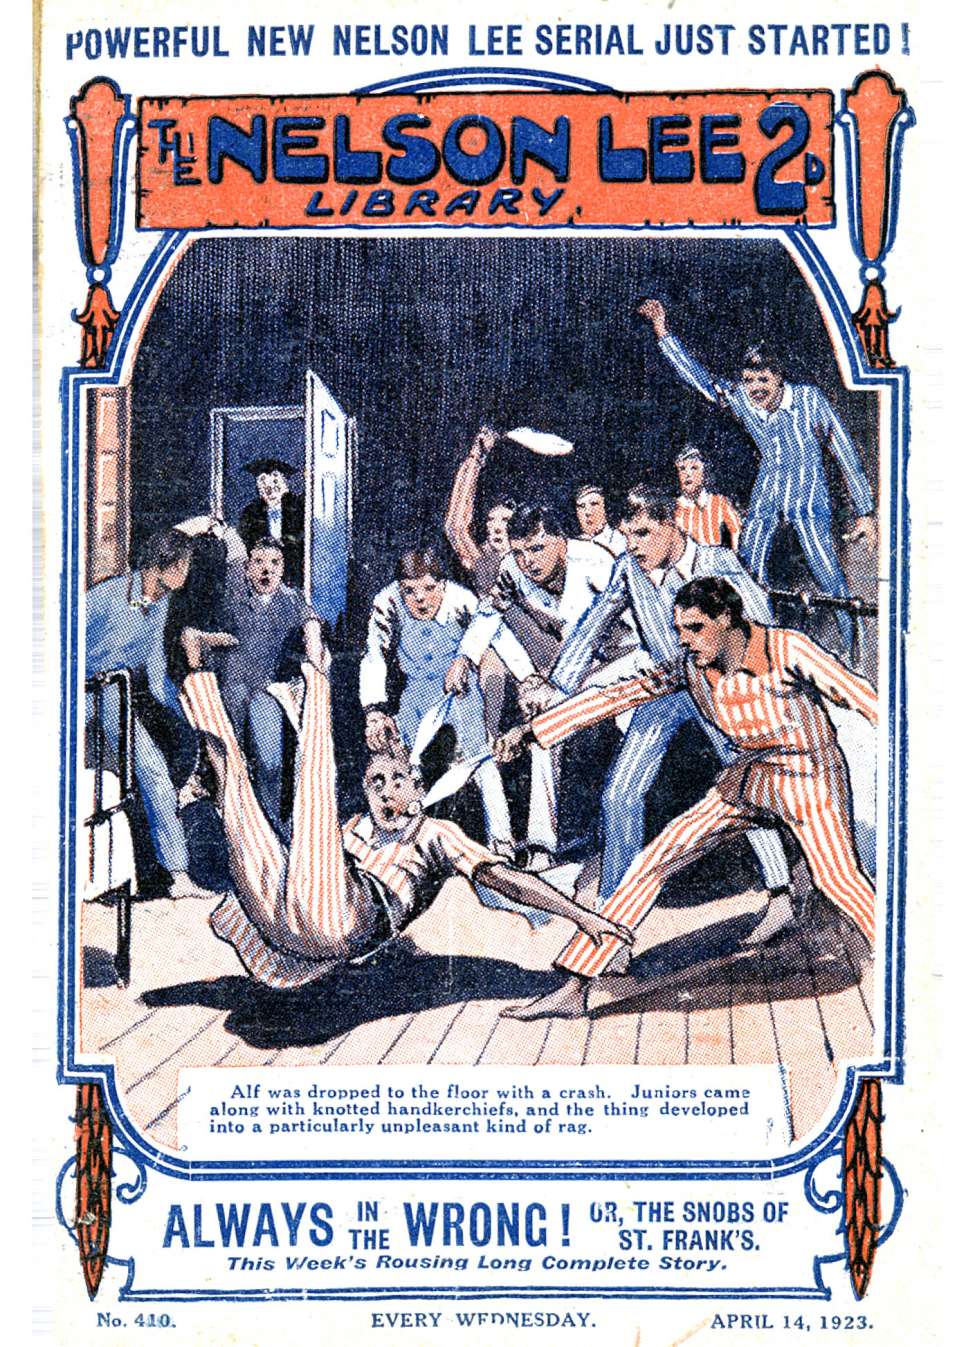 Comic Book Cover For Nelson Lee Library s1 410 - Always in the Wrong